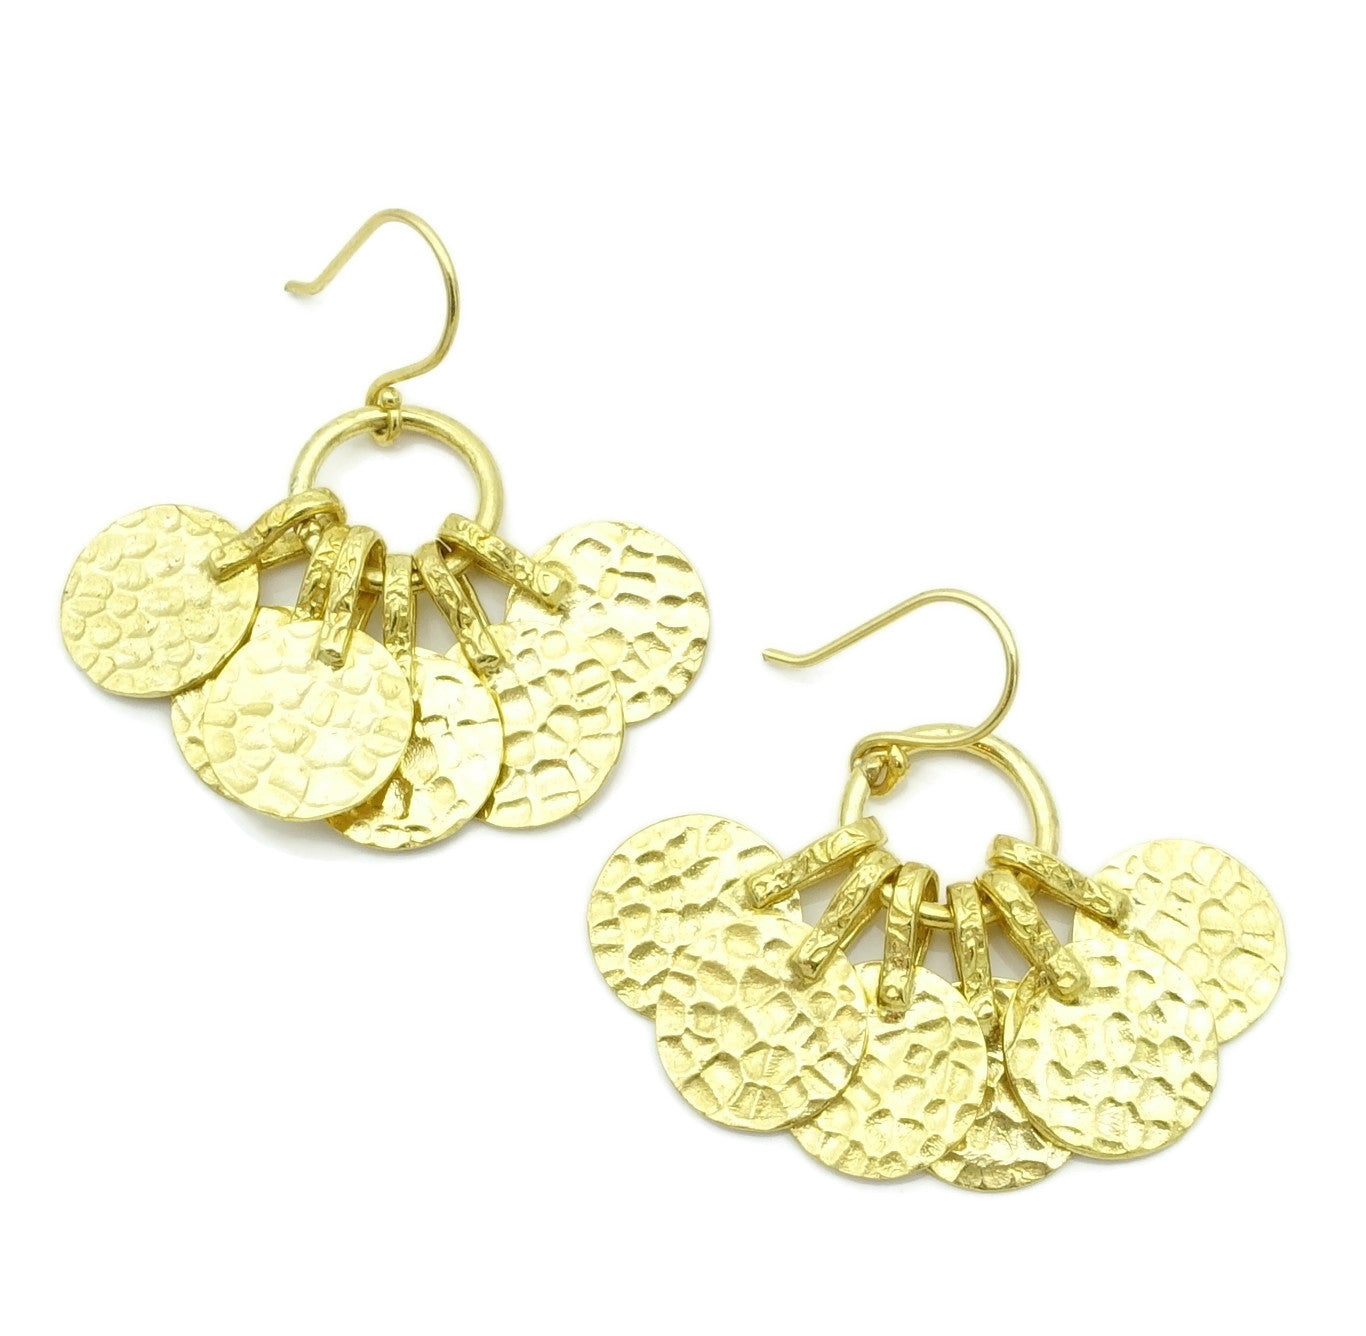 Aylas Coin earrings - 21ct Gold plated  - Handmade in Ottoman style